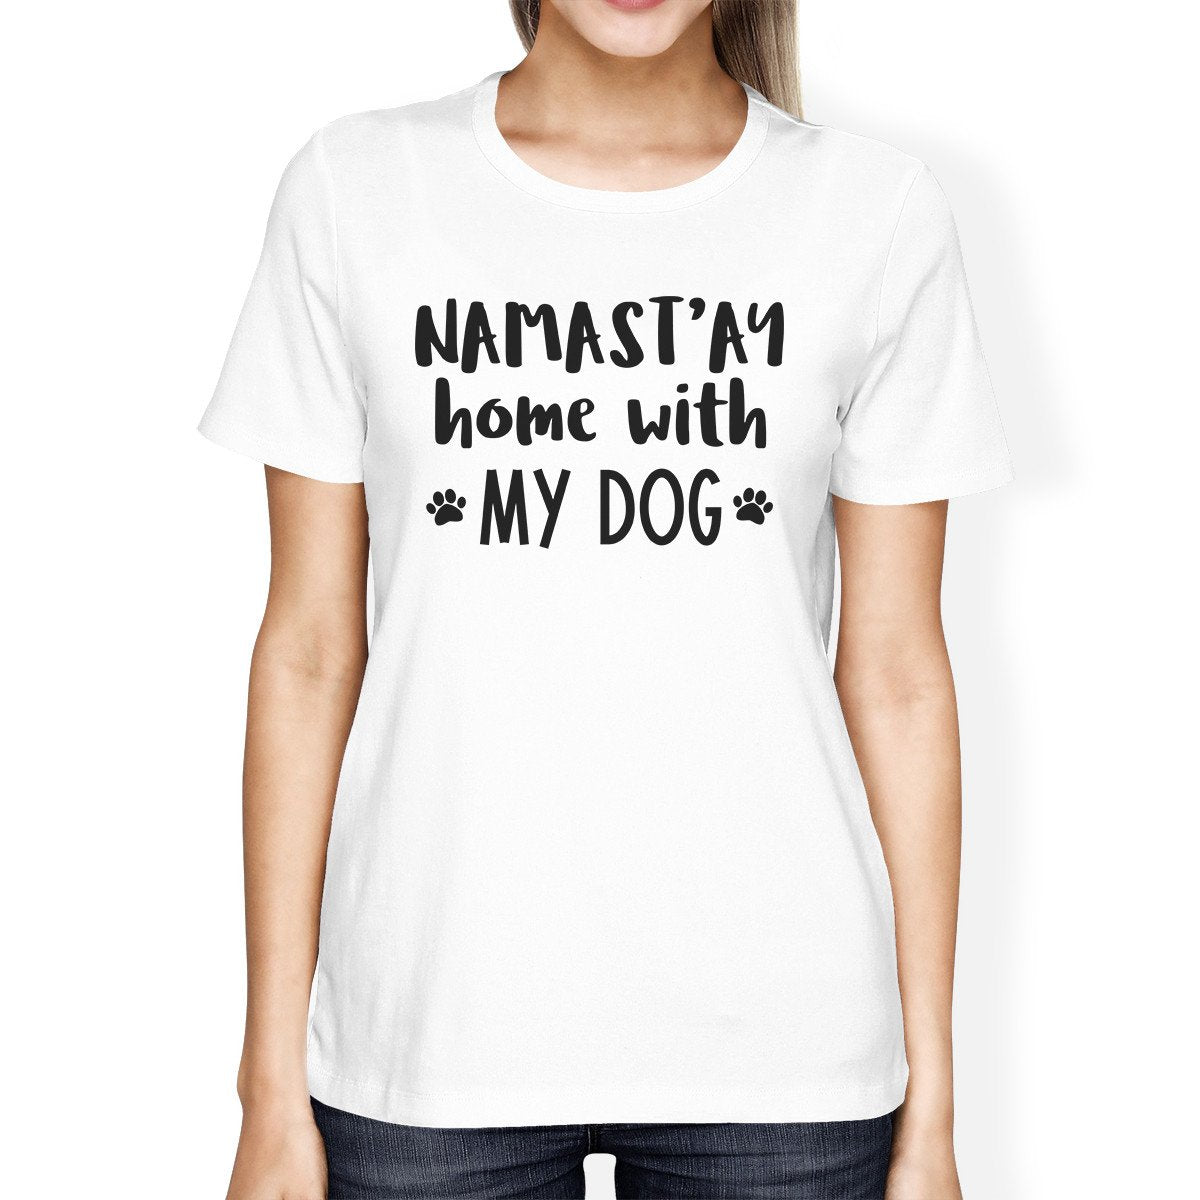 Women's Fashion - Women's Clothing - Tops & Tees - T-Shirts Namastay Women's White Crew Neck T-Shirt Unique Design for Her